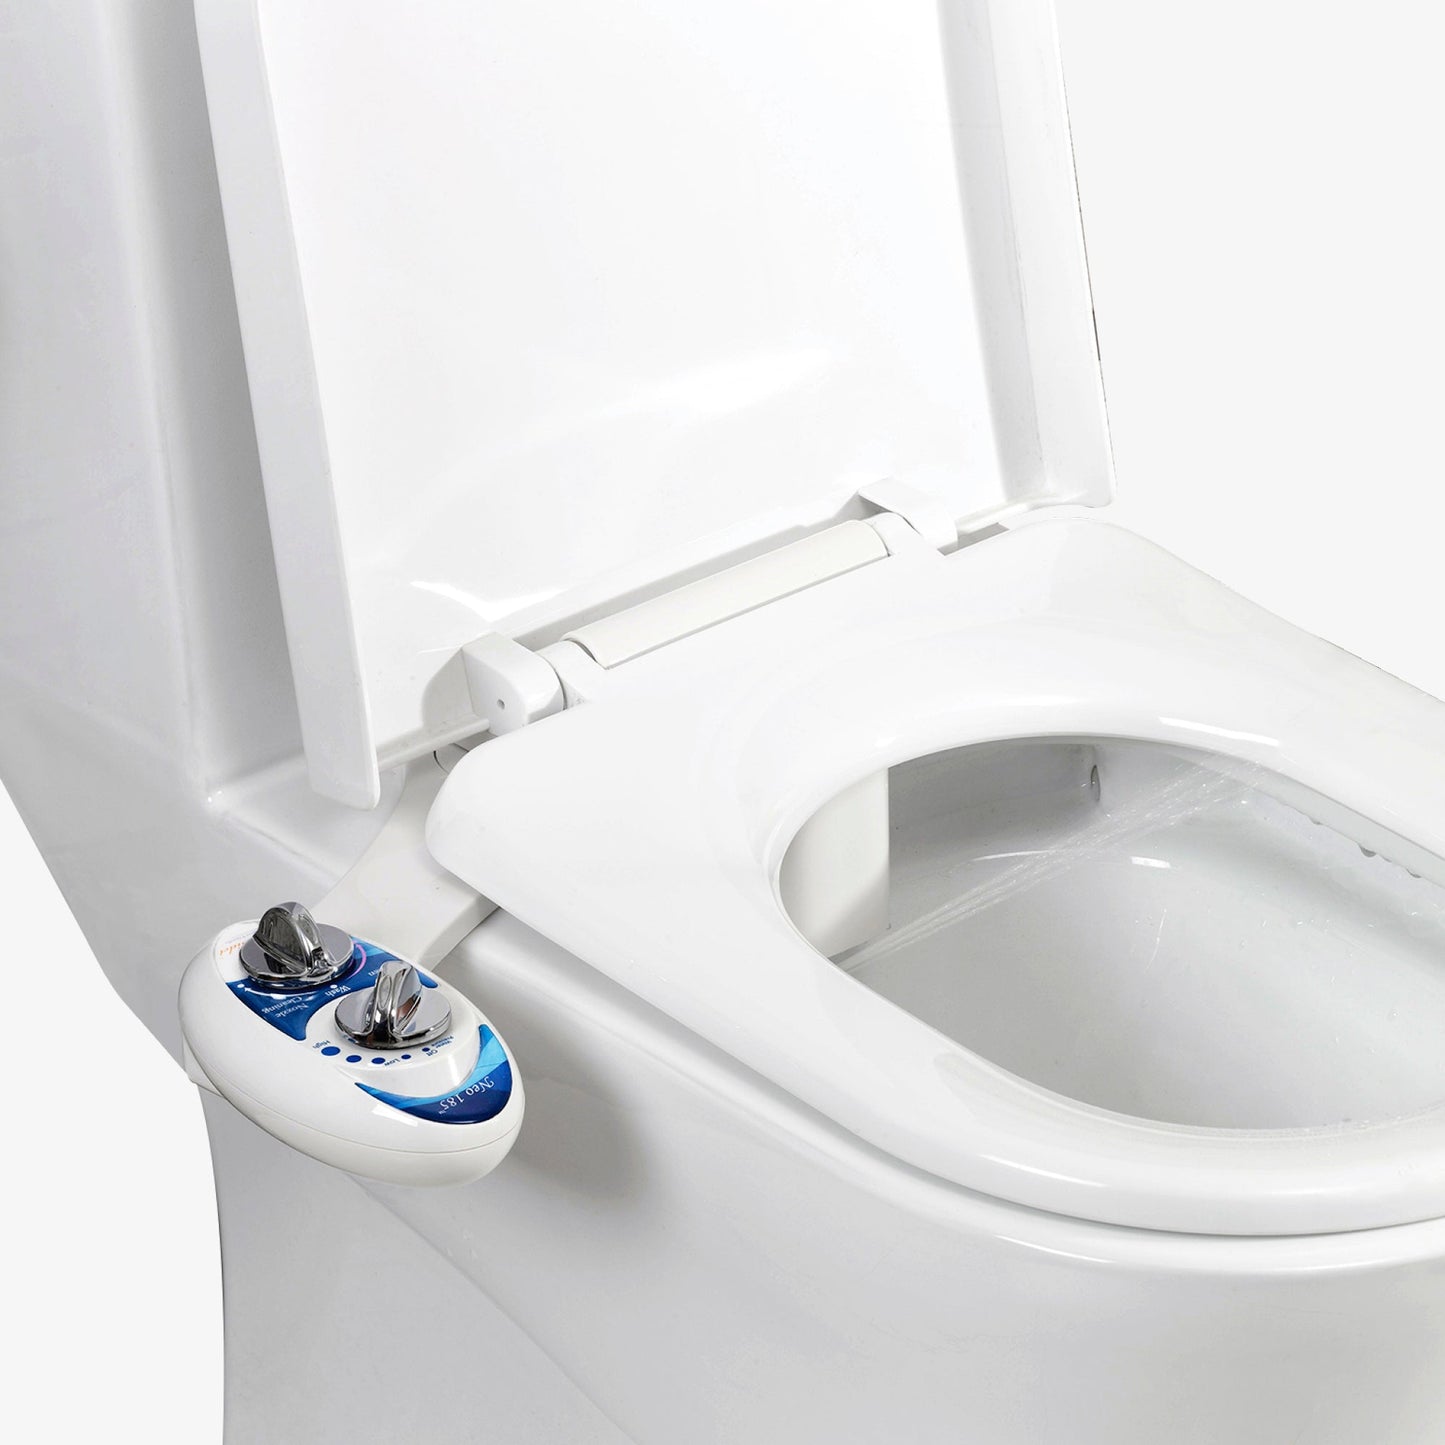 NEO 185 Blue installed on a toilet with water spraying from nozzles